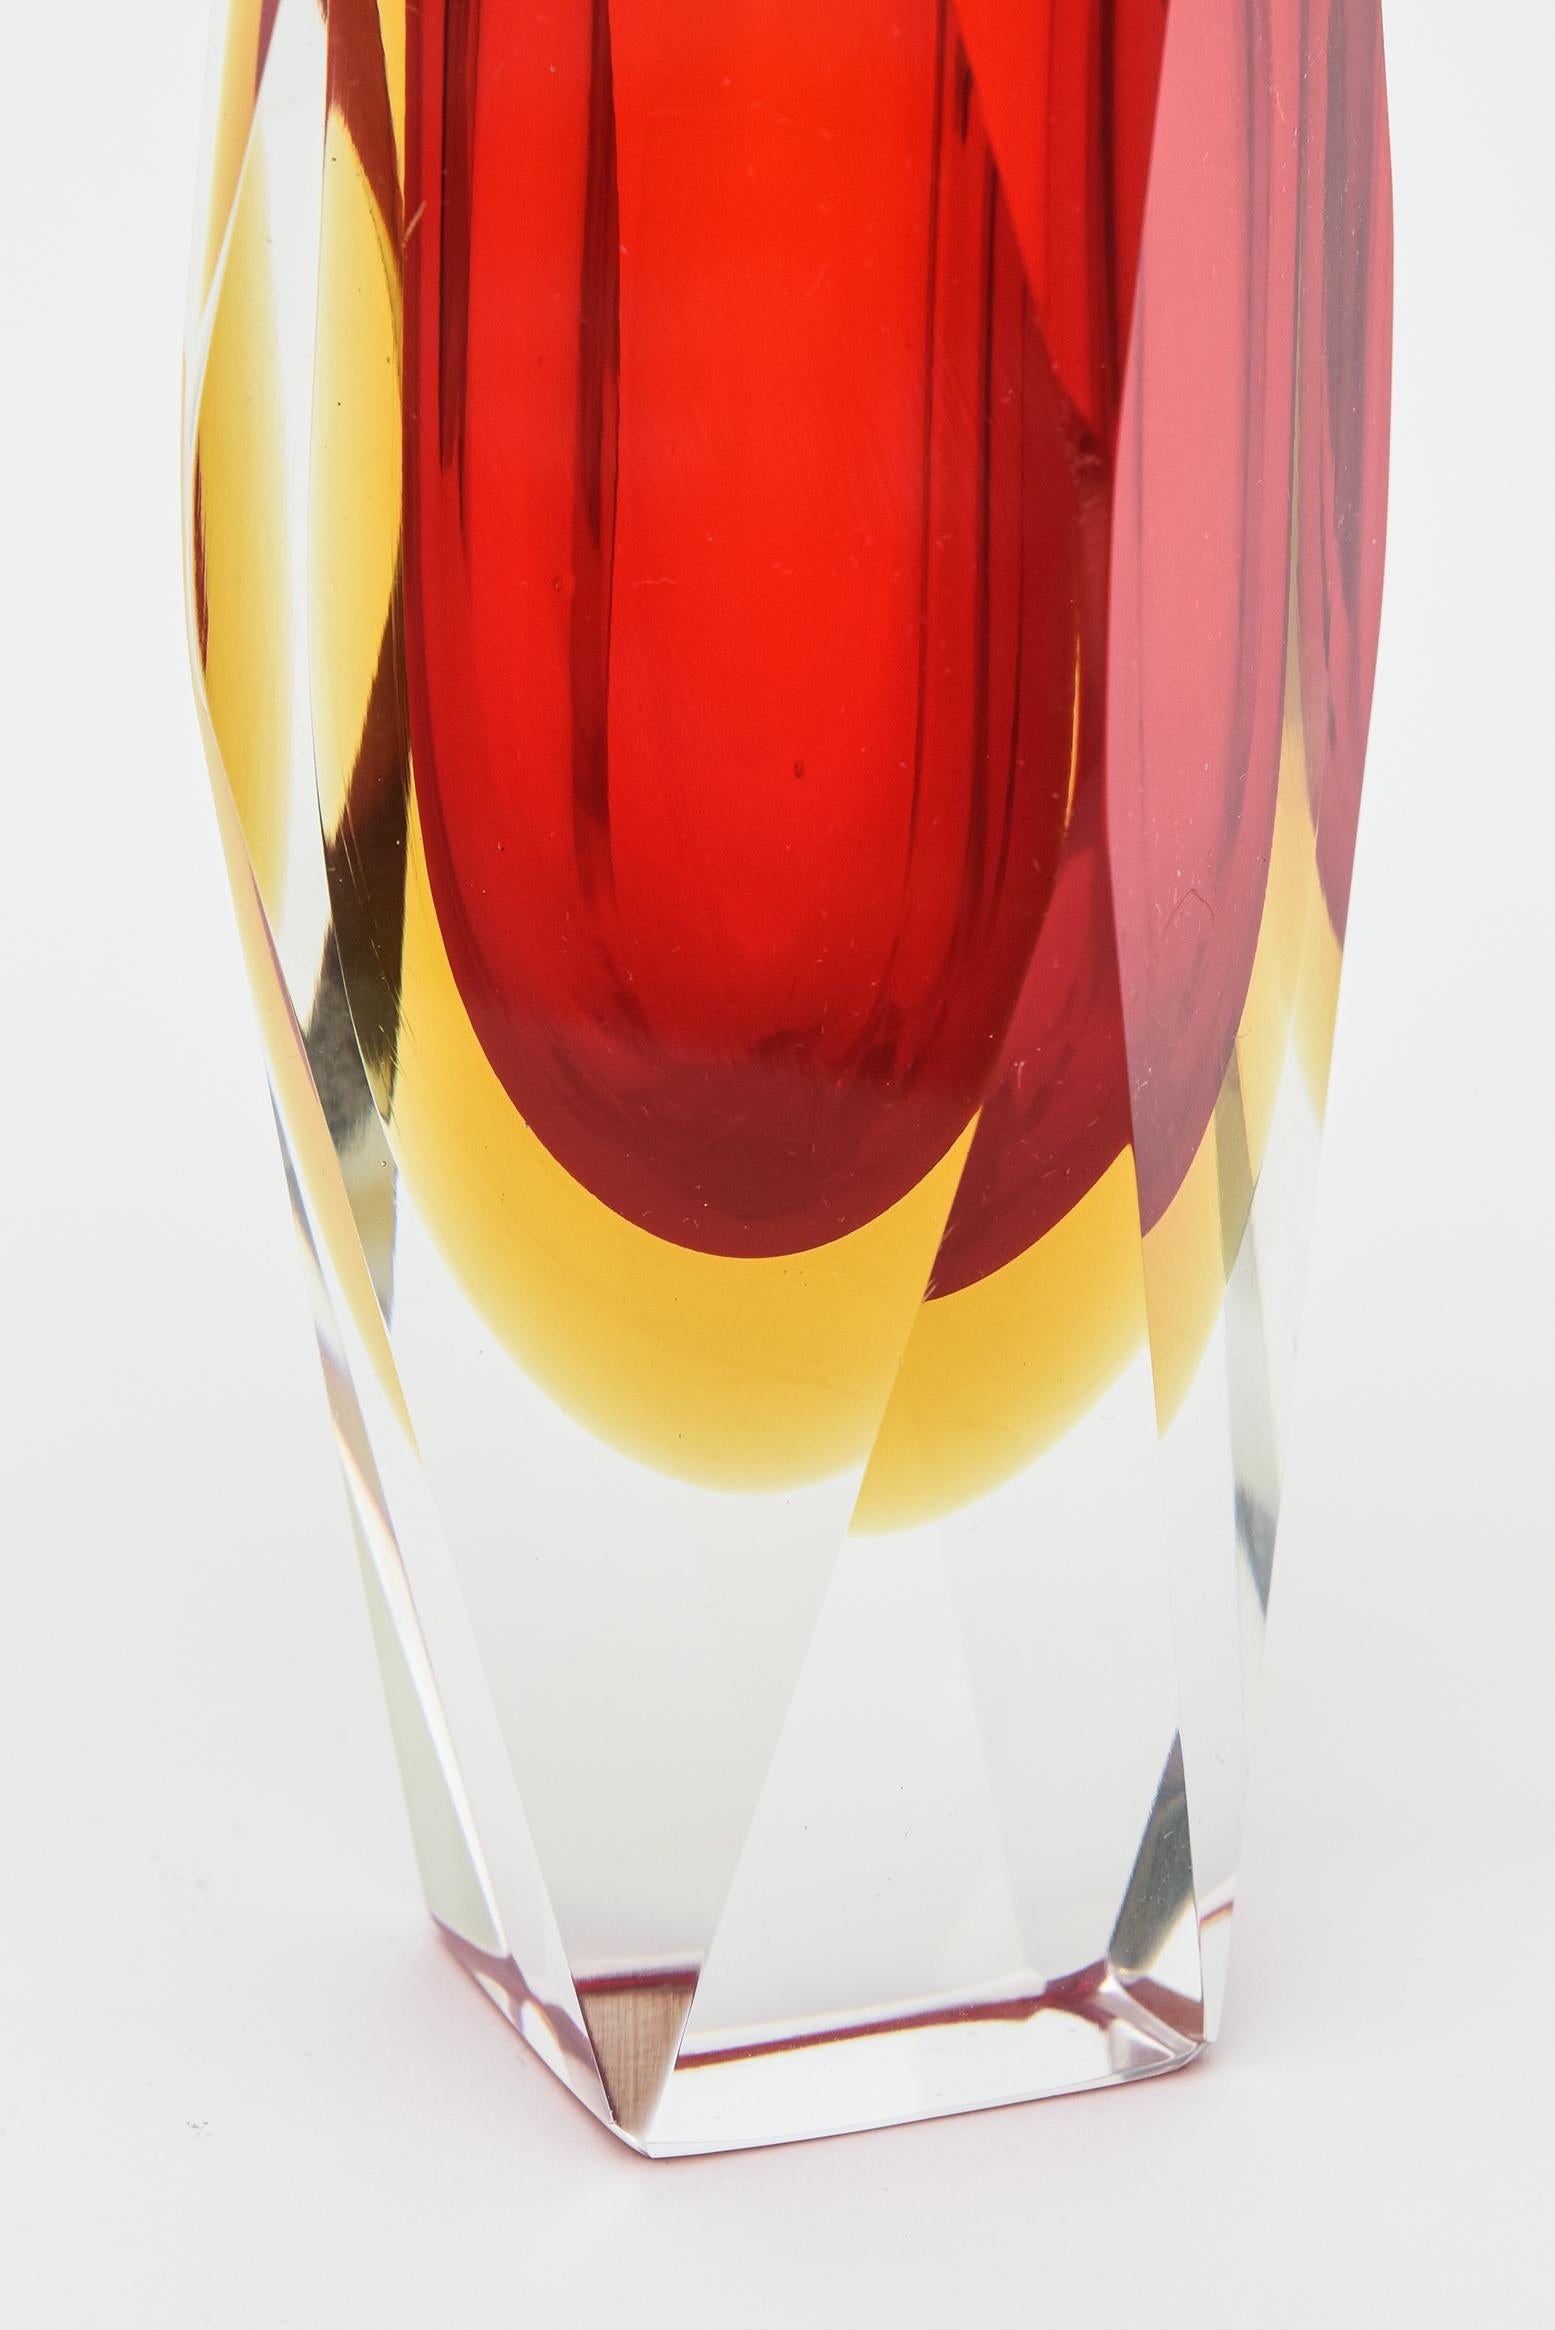 Mandruzzato Vintage Murano Red and Yellow Sommerso Faceted Glass Vase Italian For Sale 1